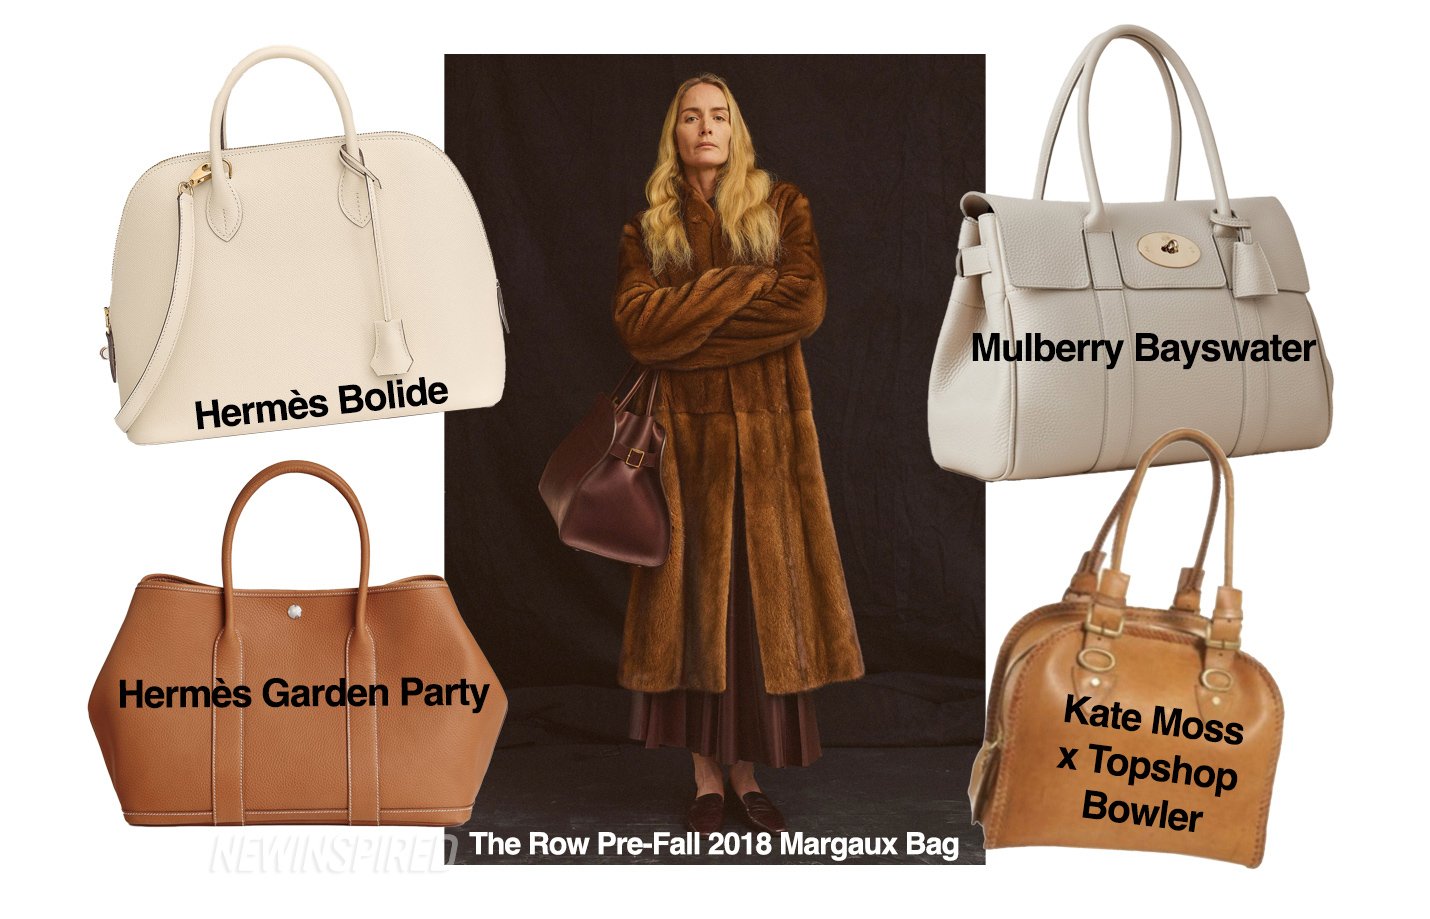 Showing how the Row's Margaux bag is more like the Hermès Bolide or Garden Party, or a Mulberry Bayswater or a Kate Moss x Topshop bag